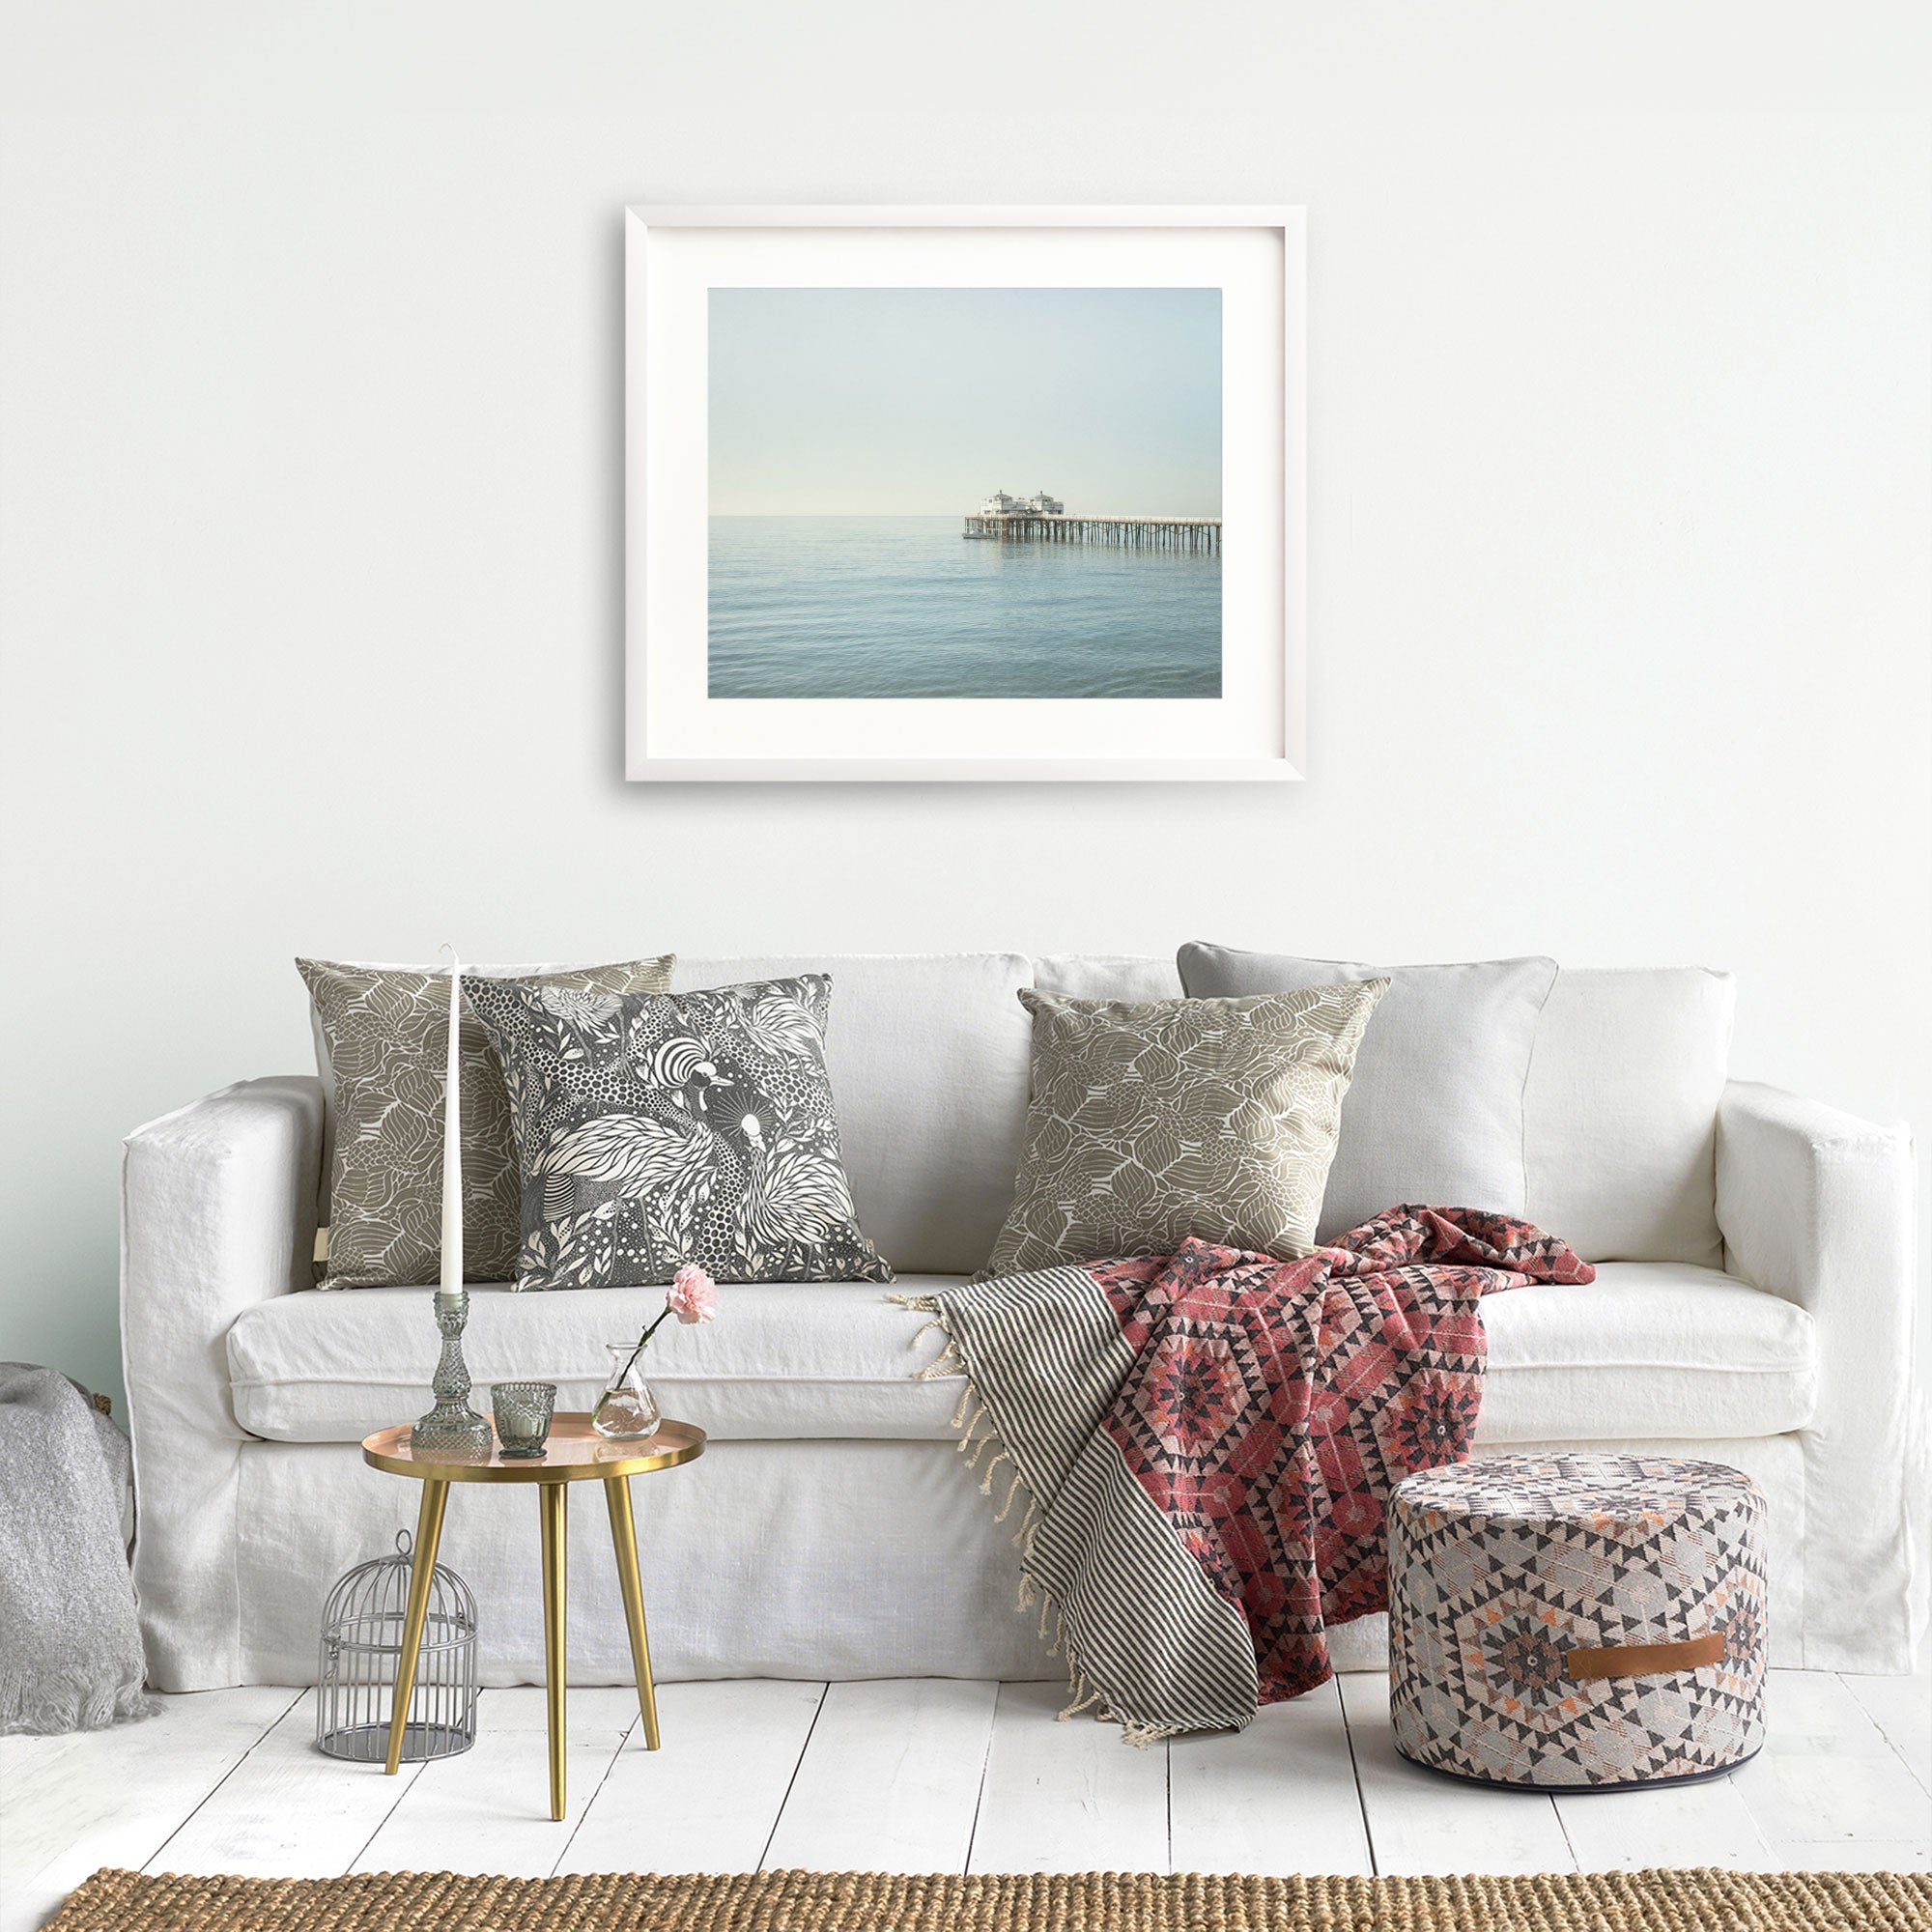 A cozy living room with a white sofa filled with decorative pillows, a red throw blanket, and a framed picture of Offley Green's Coastal Print of Malibu Pier in California 'All Calm in Malibu' above it. A small table with a book and a flower.